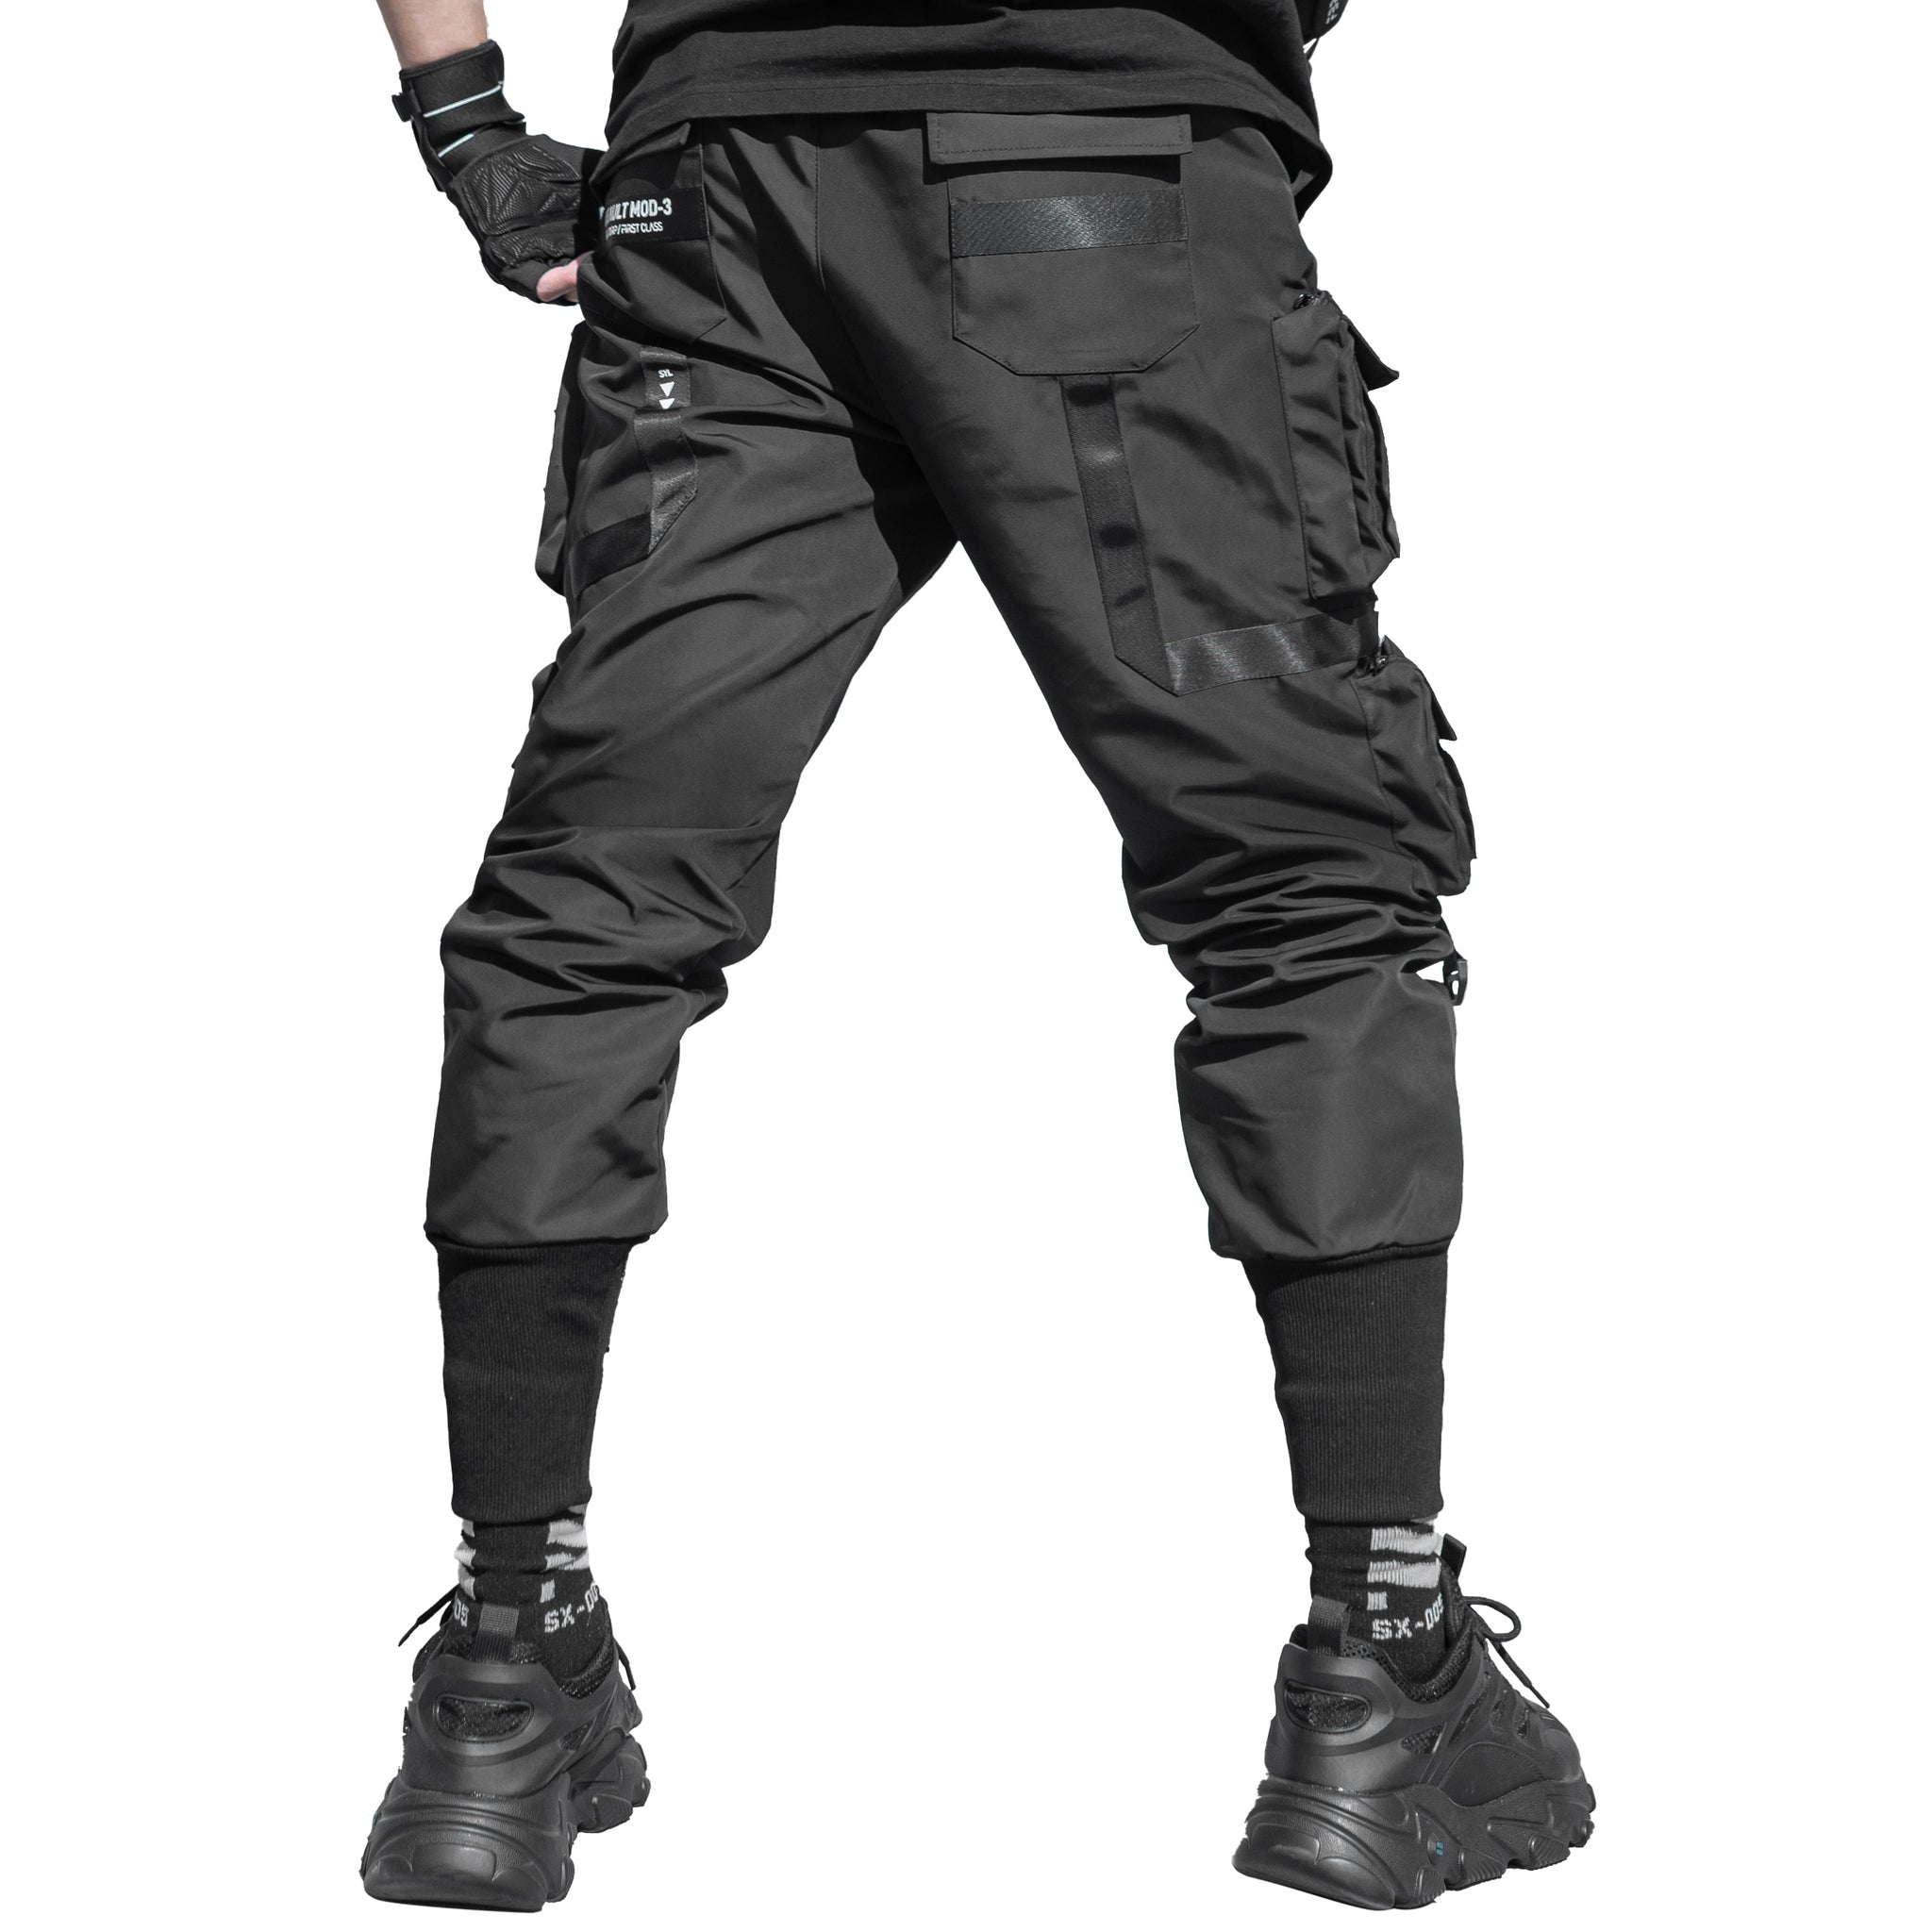 CG-Type 04G White Cargo Joggers - Fabric of the Universe